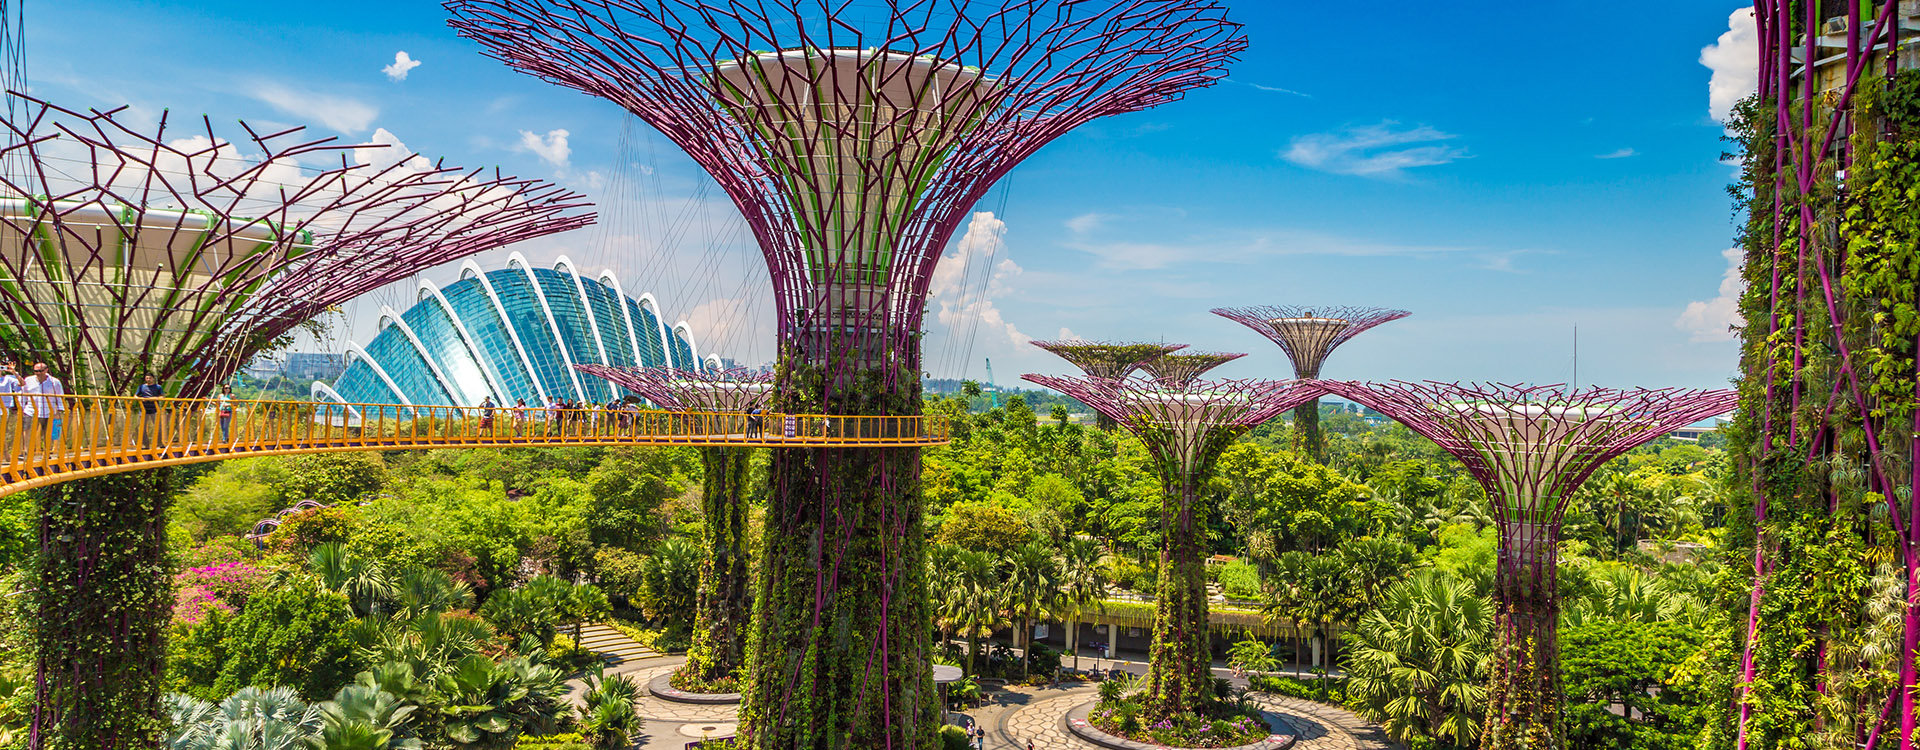 The Supertree Grove at Gardens by the Bay in Singapore near Marina Bay Sands hotel